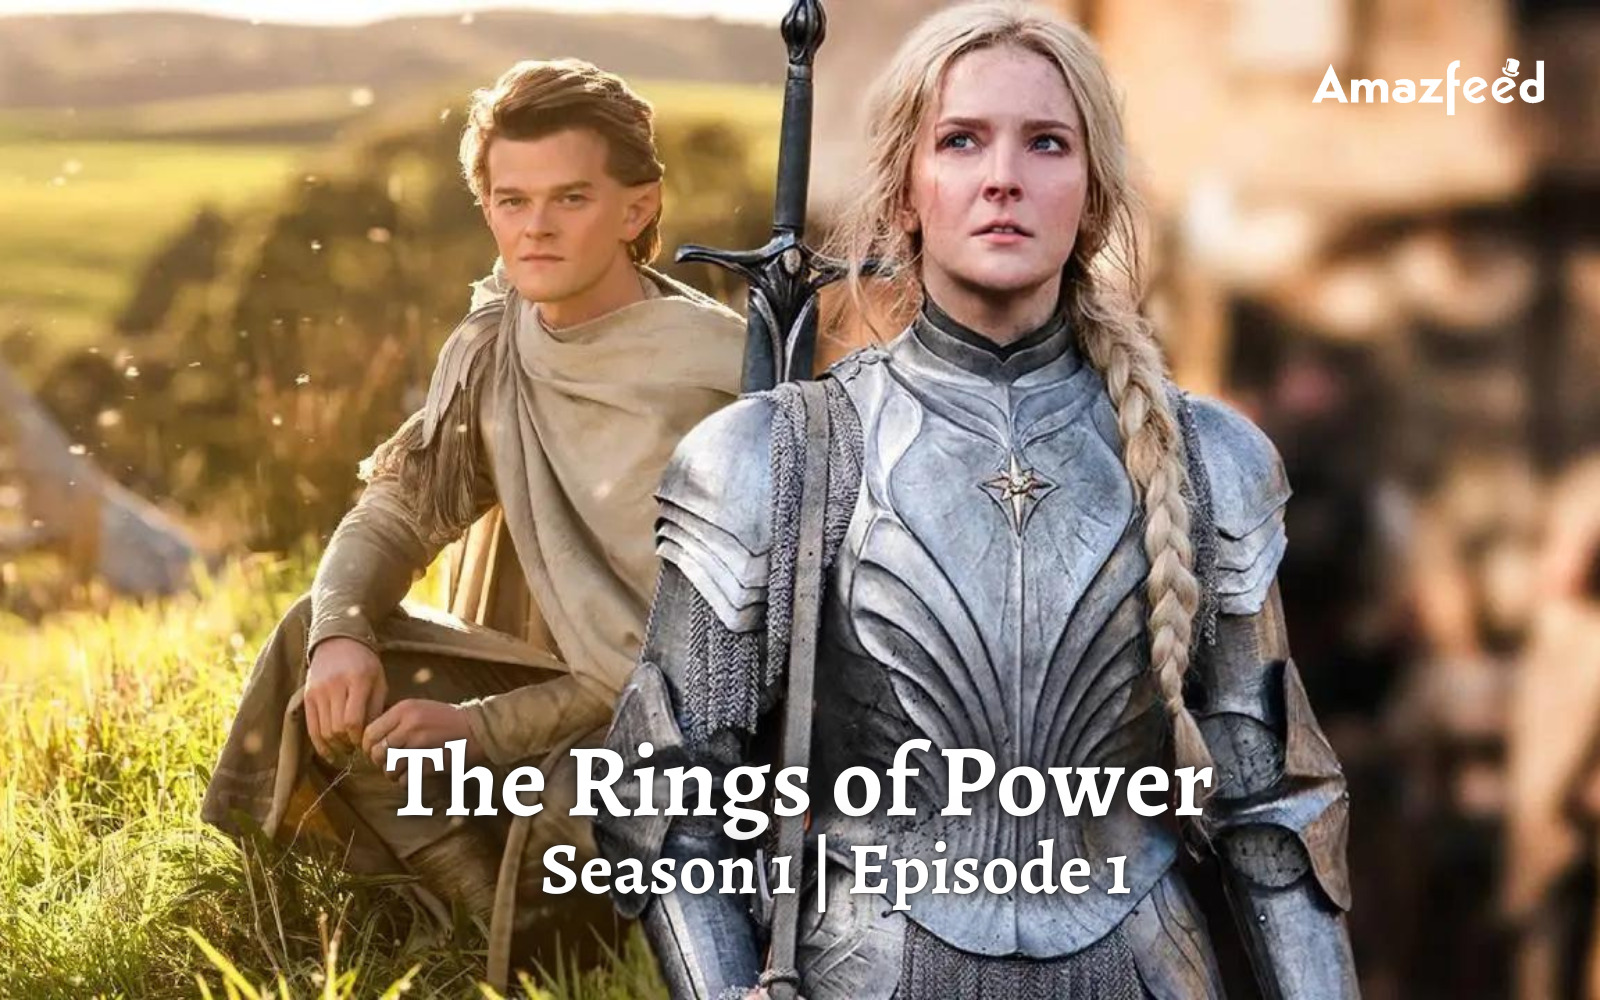 The Rings of Power Episode 1 Release Date